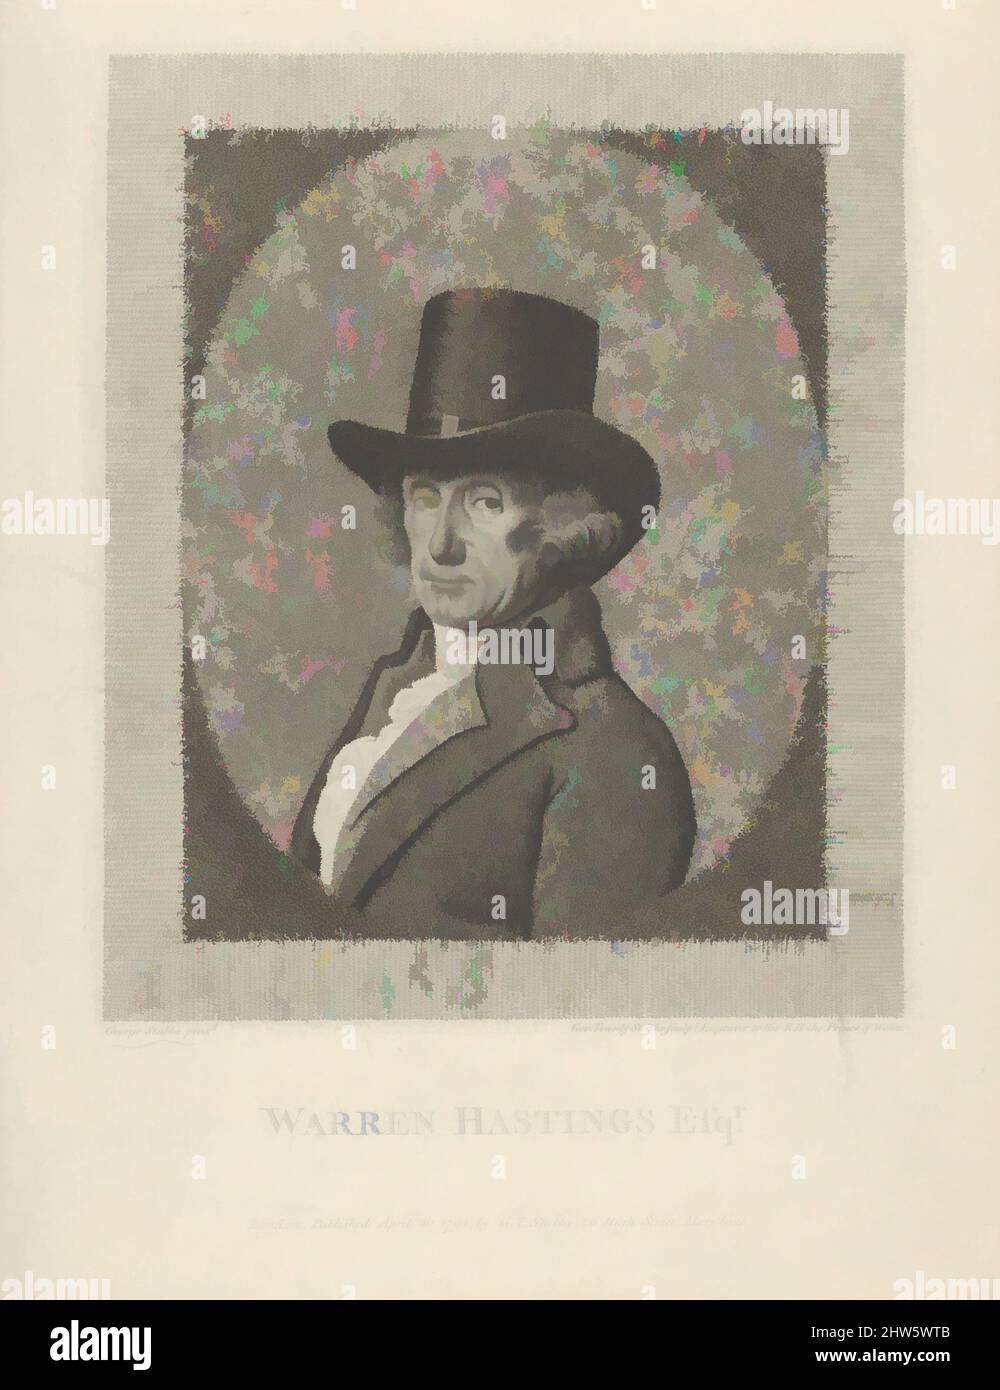 Art inspired by Portrait of Warren Hastings, Esq., April 30, 1795, Stipple engraving, image: 6 5/8 x 5 1/2 in. (16.8 x 14 cm), Prints, George Townley Stubbs (British, Liverpool 1756–1815), After George Stubbs (British, Liverpool 1724–1806 London, Classic works modernized by Artotop with a splash of modernity. Shapes, color and value, eye-catching visual impact on art. Emotions through freedom of artworks in a contemporary way. A timeless message pursuing a wildly creative new direction. Artists turning to the digital medium and creating the Artotop NFT Stock Photo